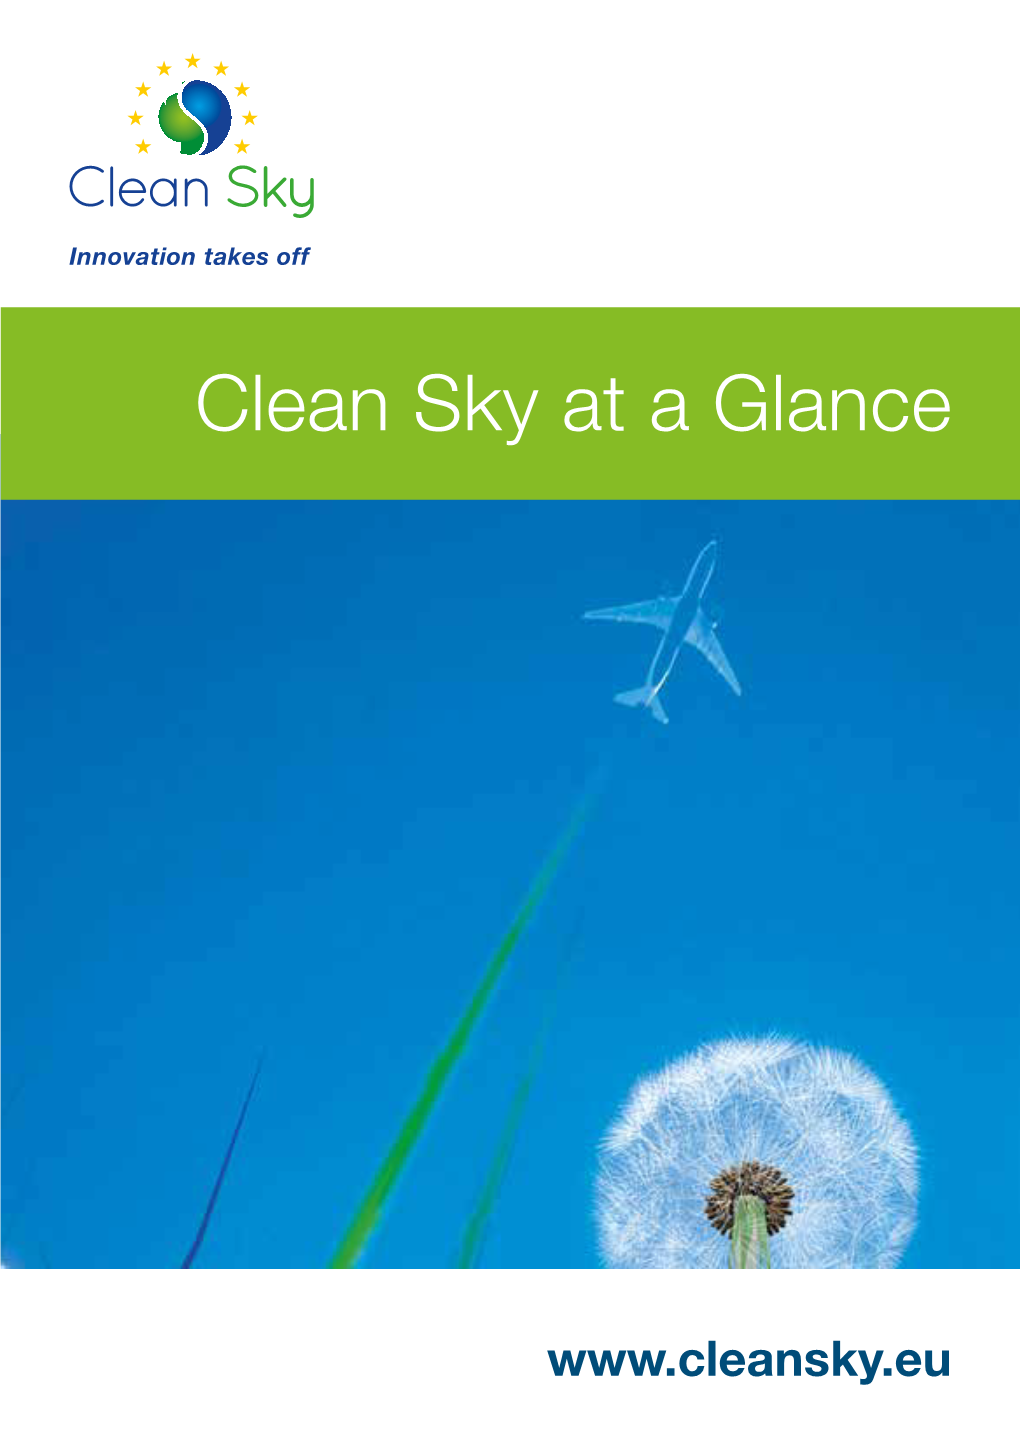 Clean Sky at a Glance